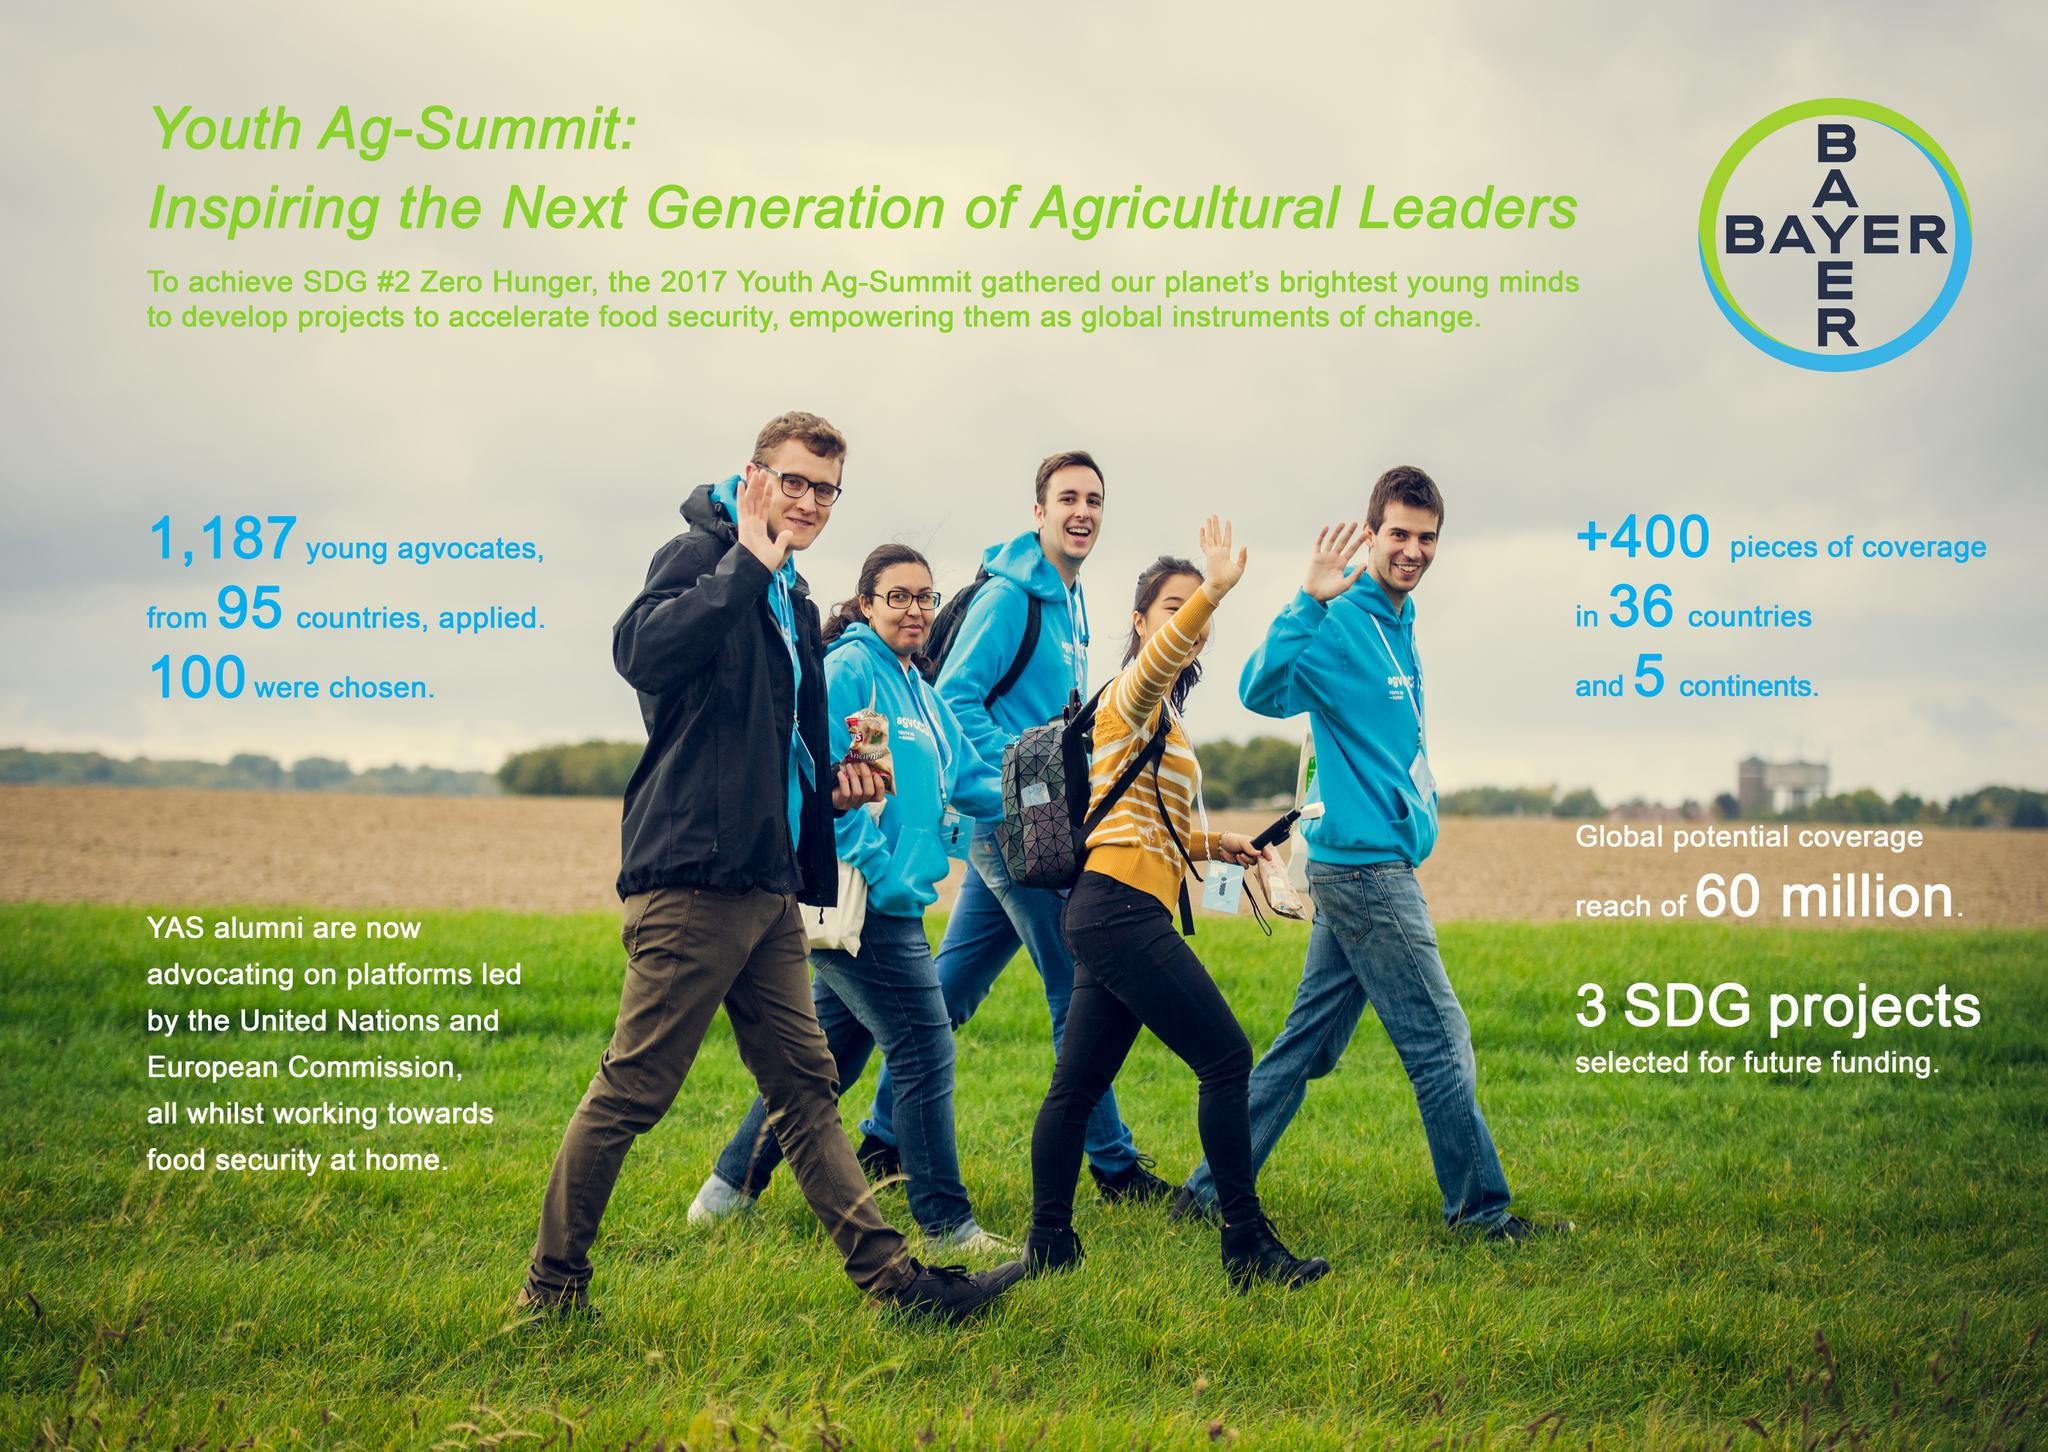 Youth Ag-Summit: Inspiring the Next Generation of Agricultural Leaders